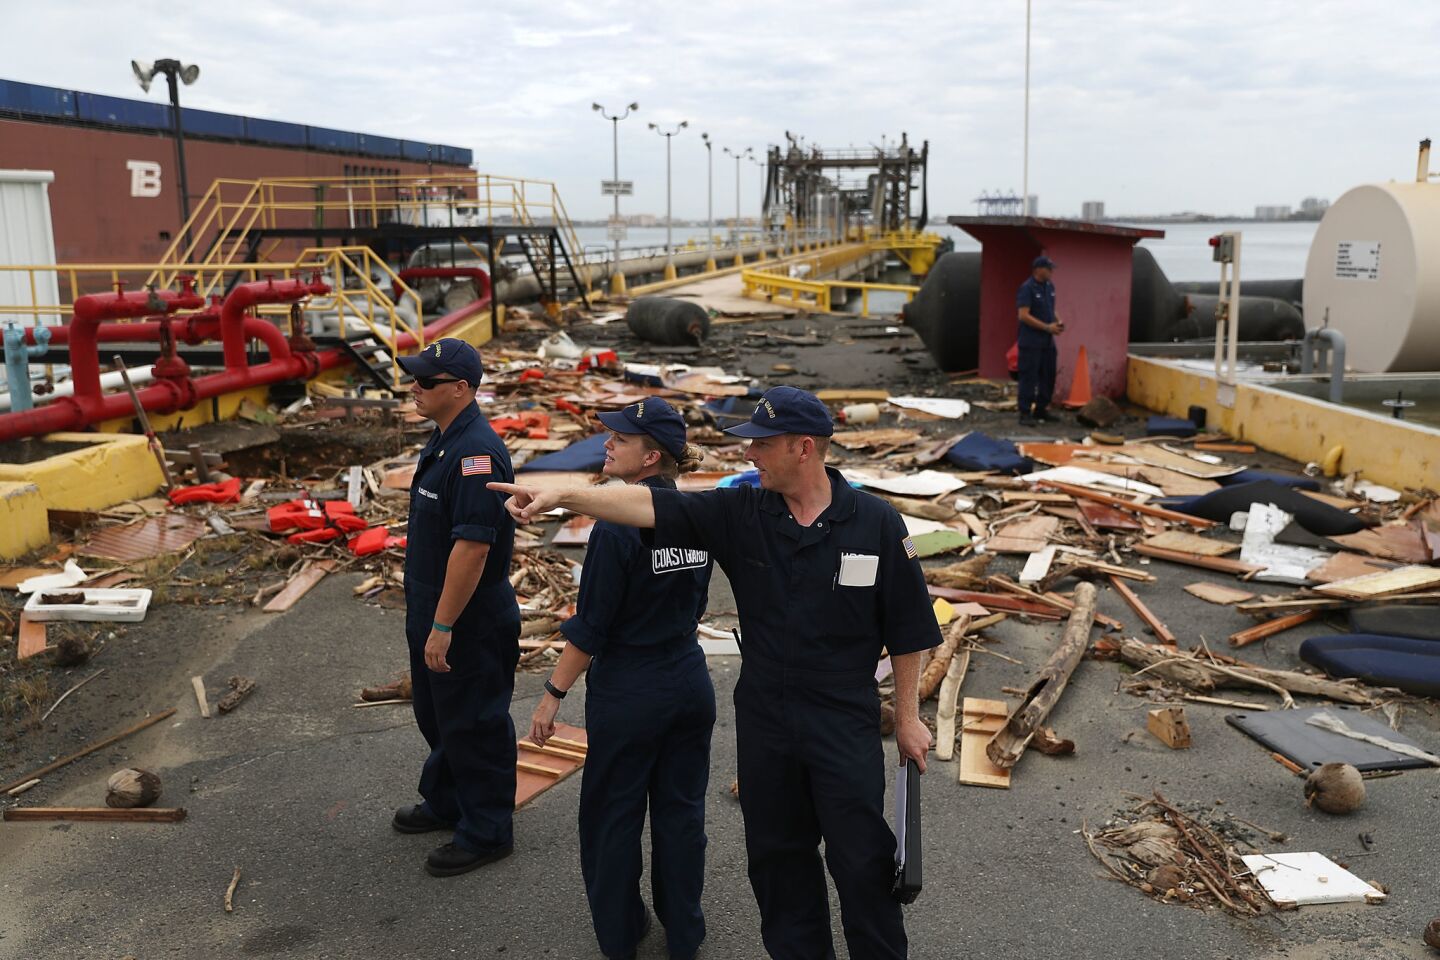 U.S. Coast Guard personnel survey the damage to an oil dock after Hurricane Maria passed through the area in San Juan, Puerto Rico.